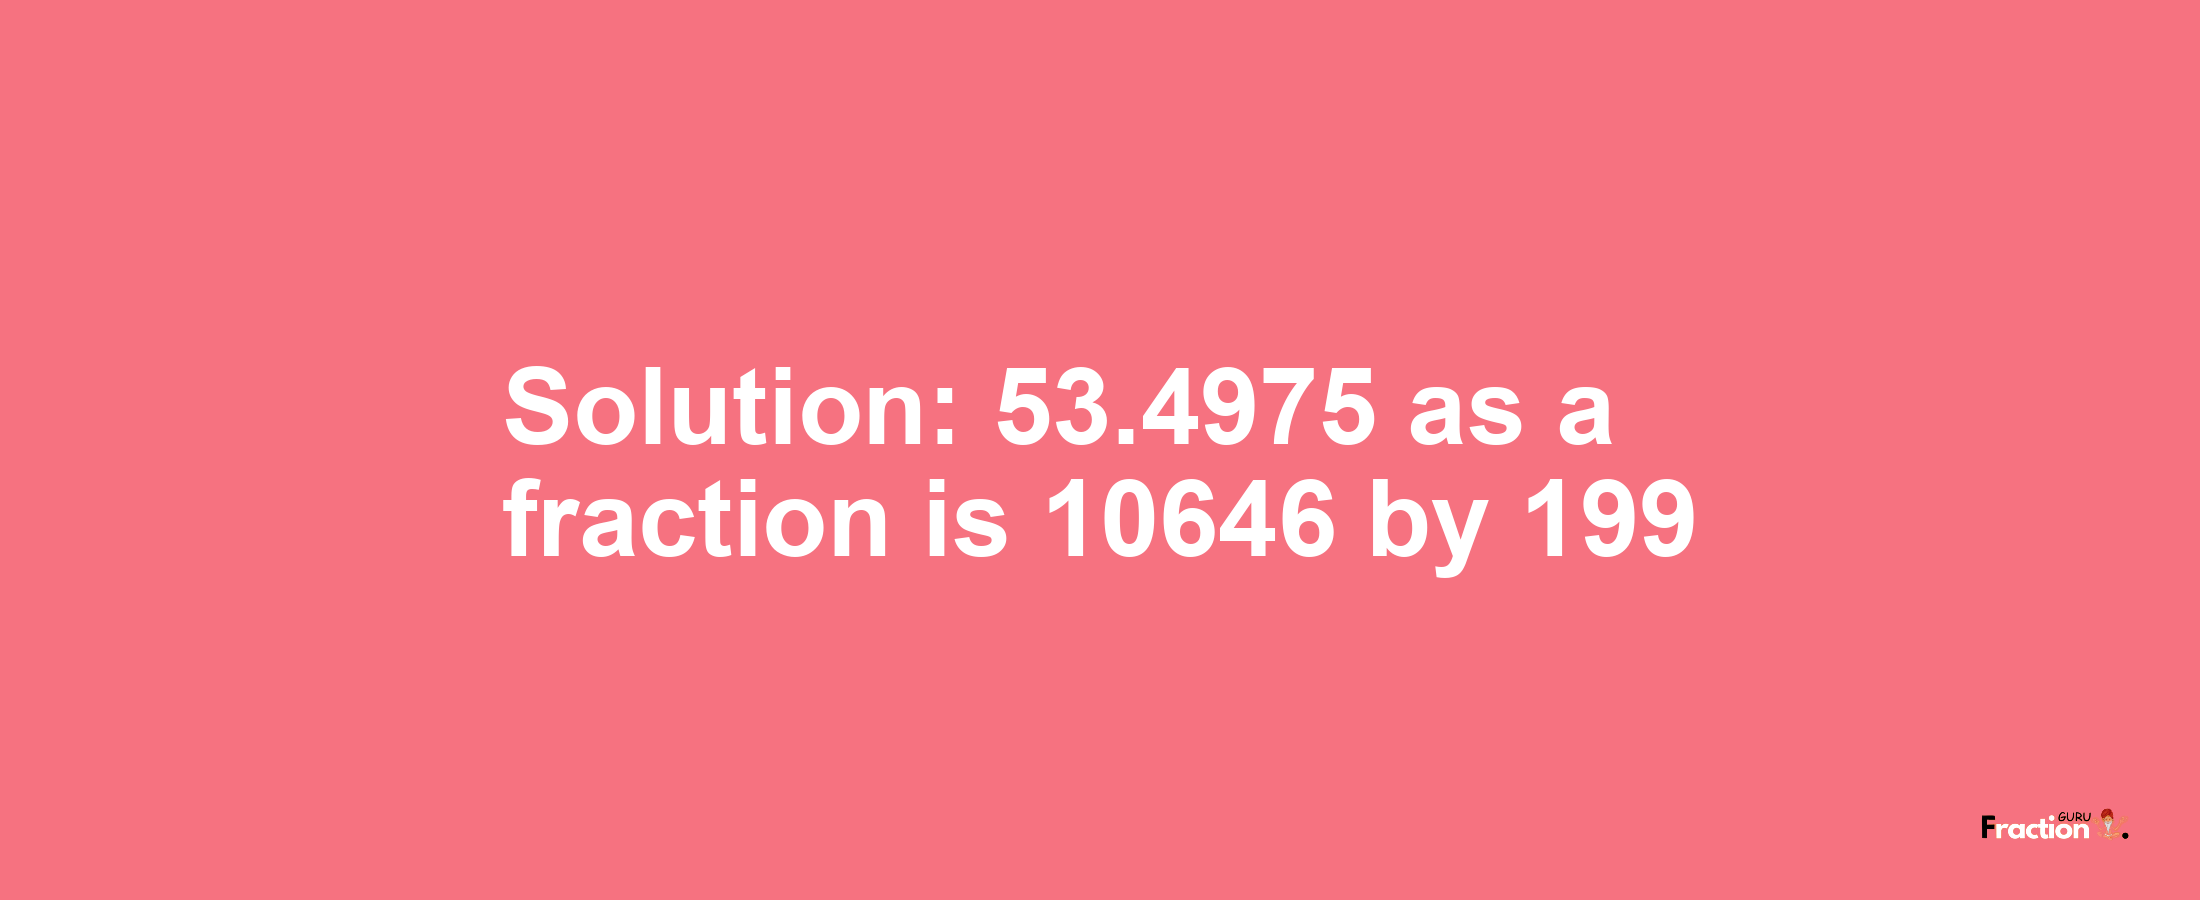 Solution:53.4975 as a fraction is 10646/199